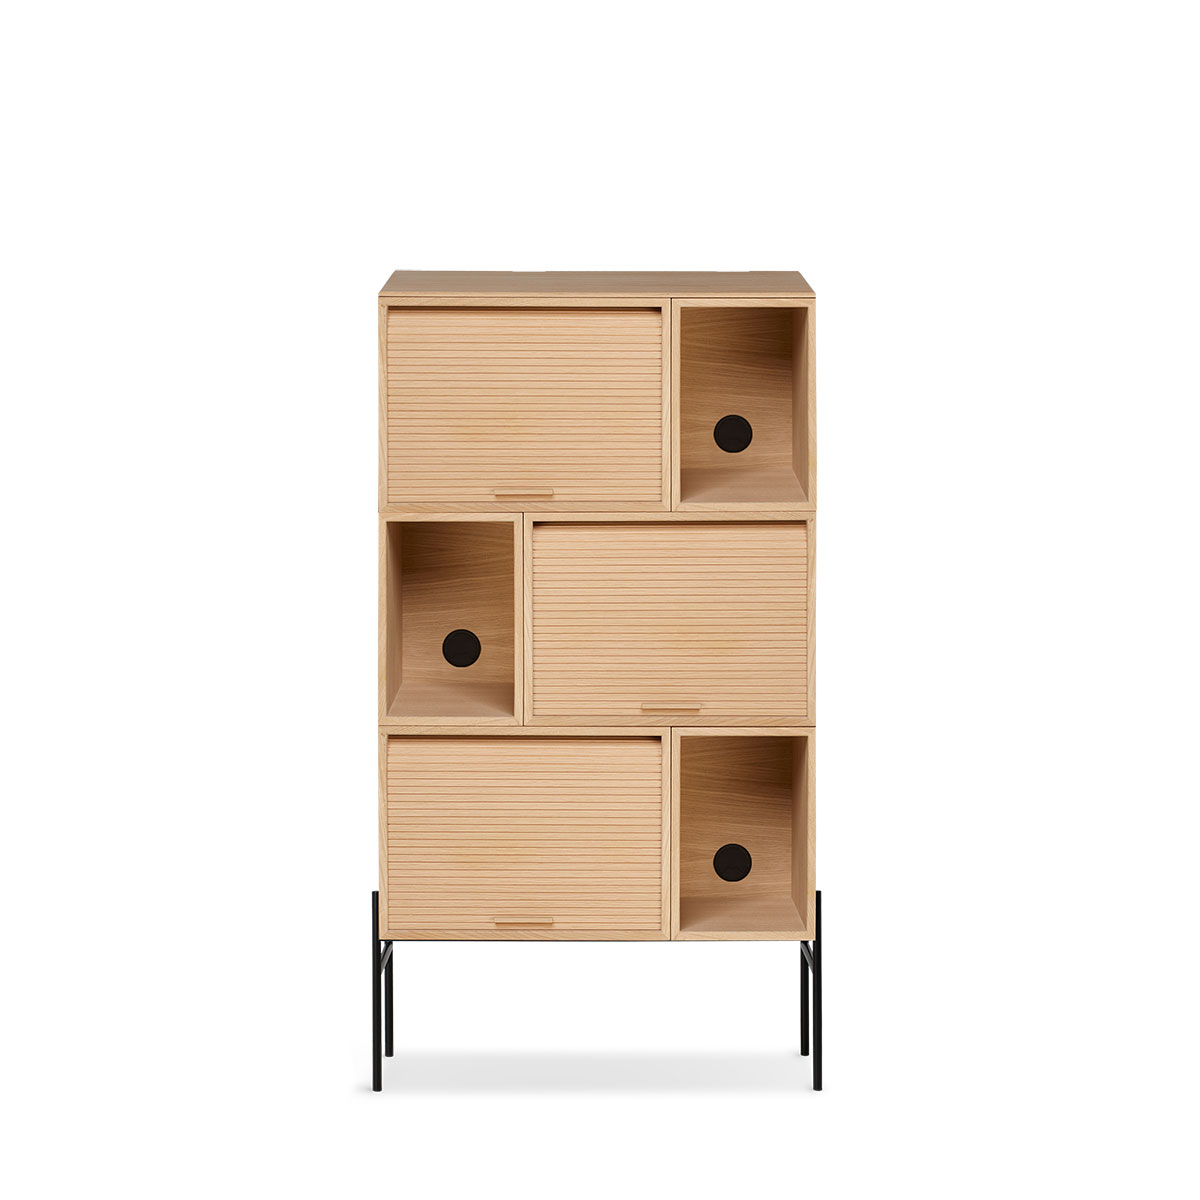 Hifive Tall Cabinet 75x114cm